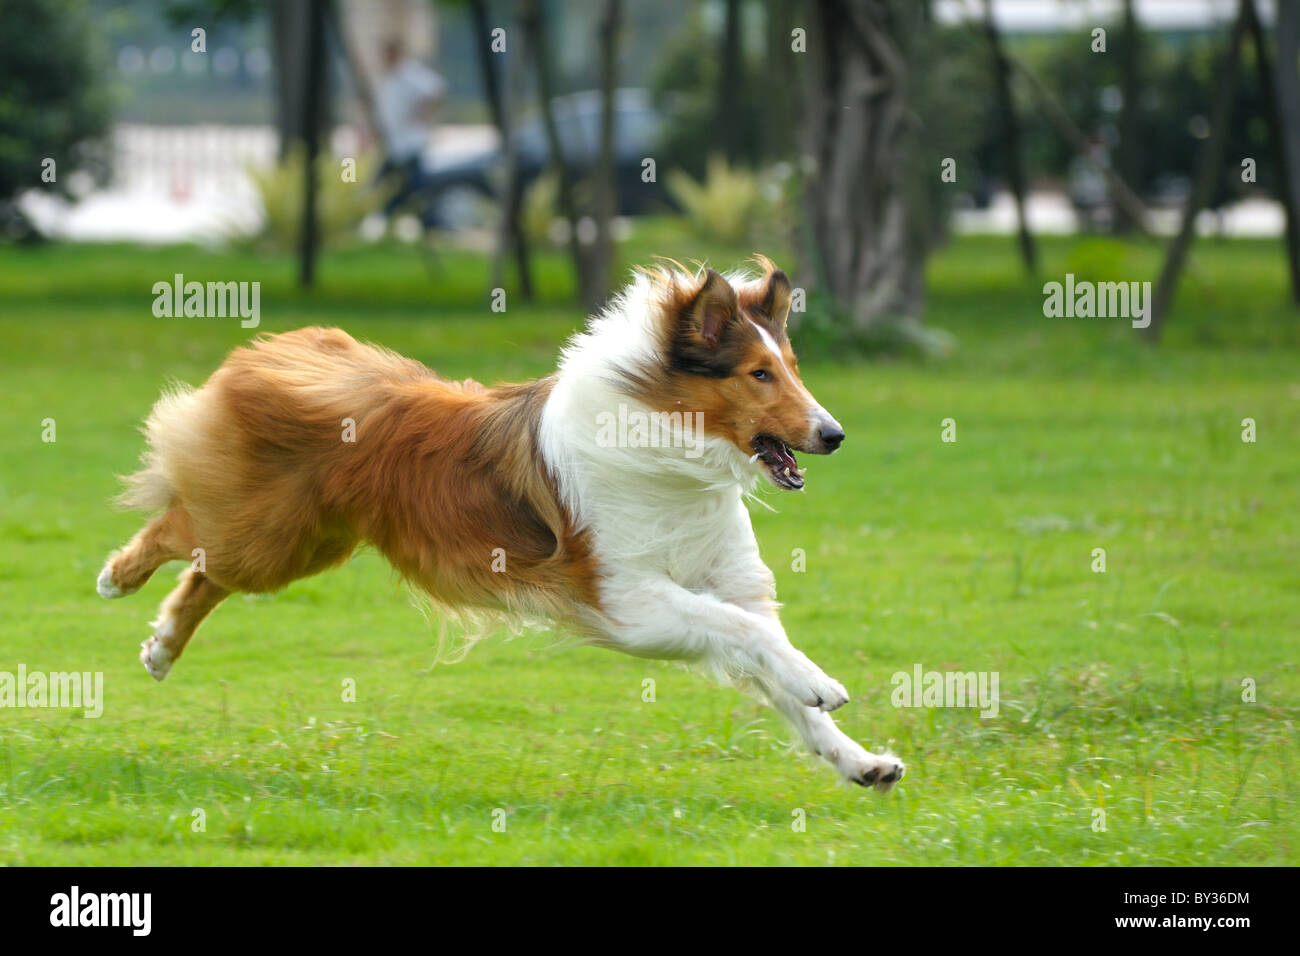 Collie dog running on the lawn Stock Photo